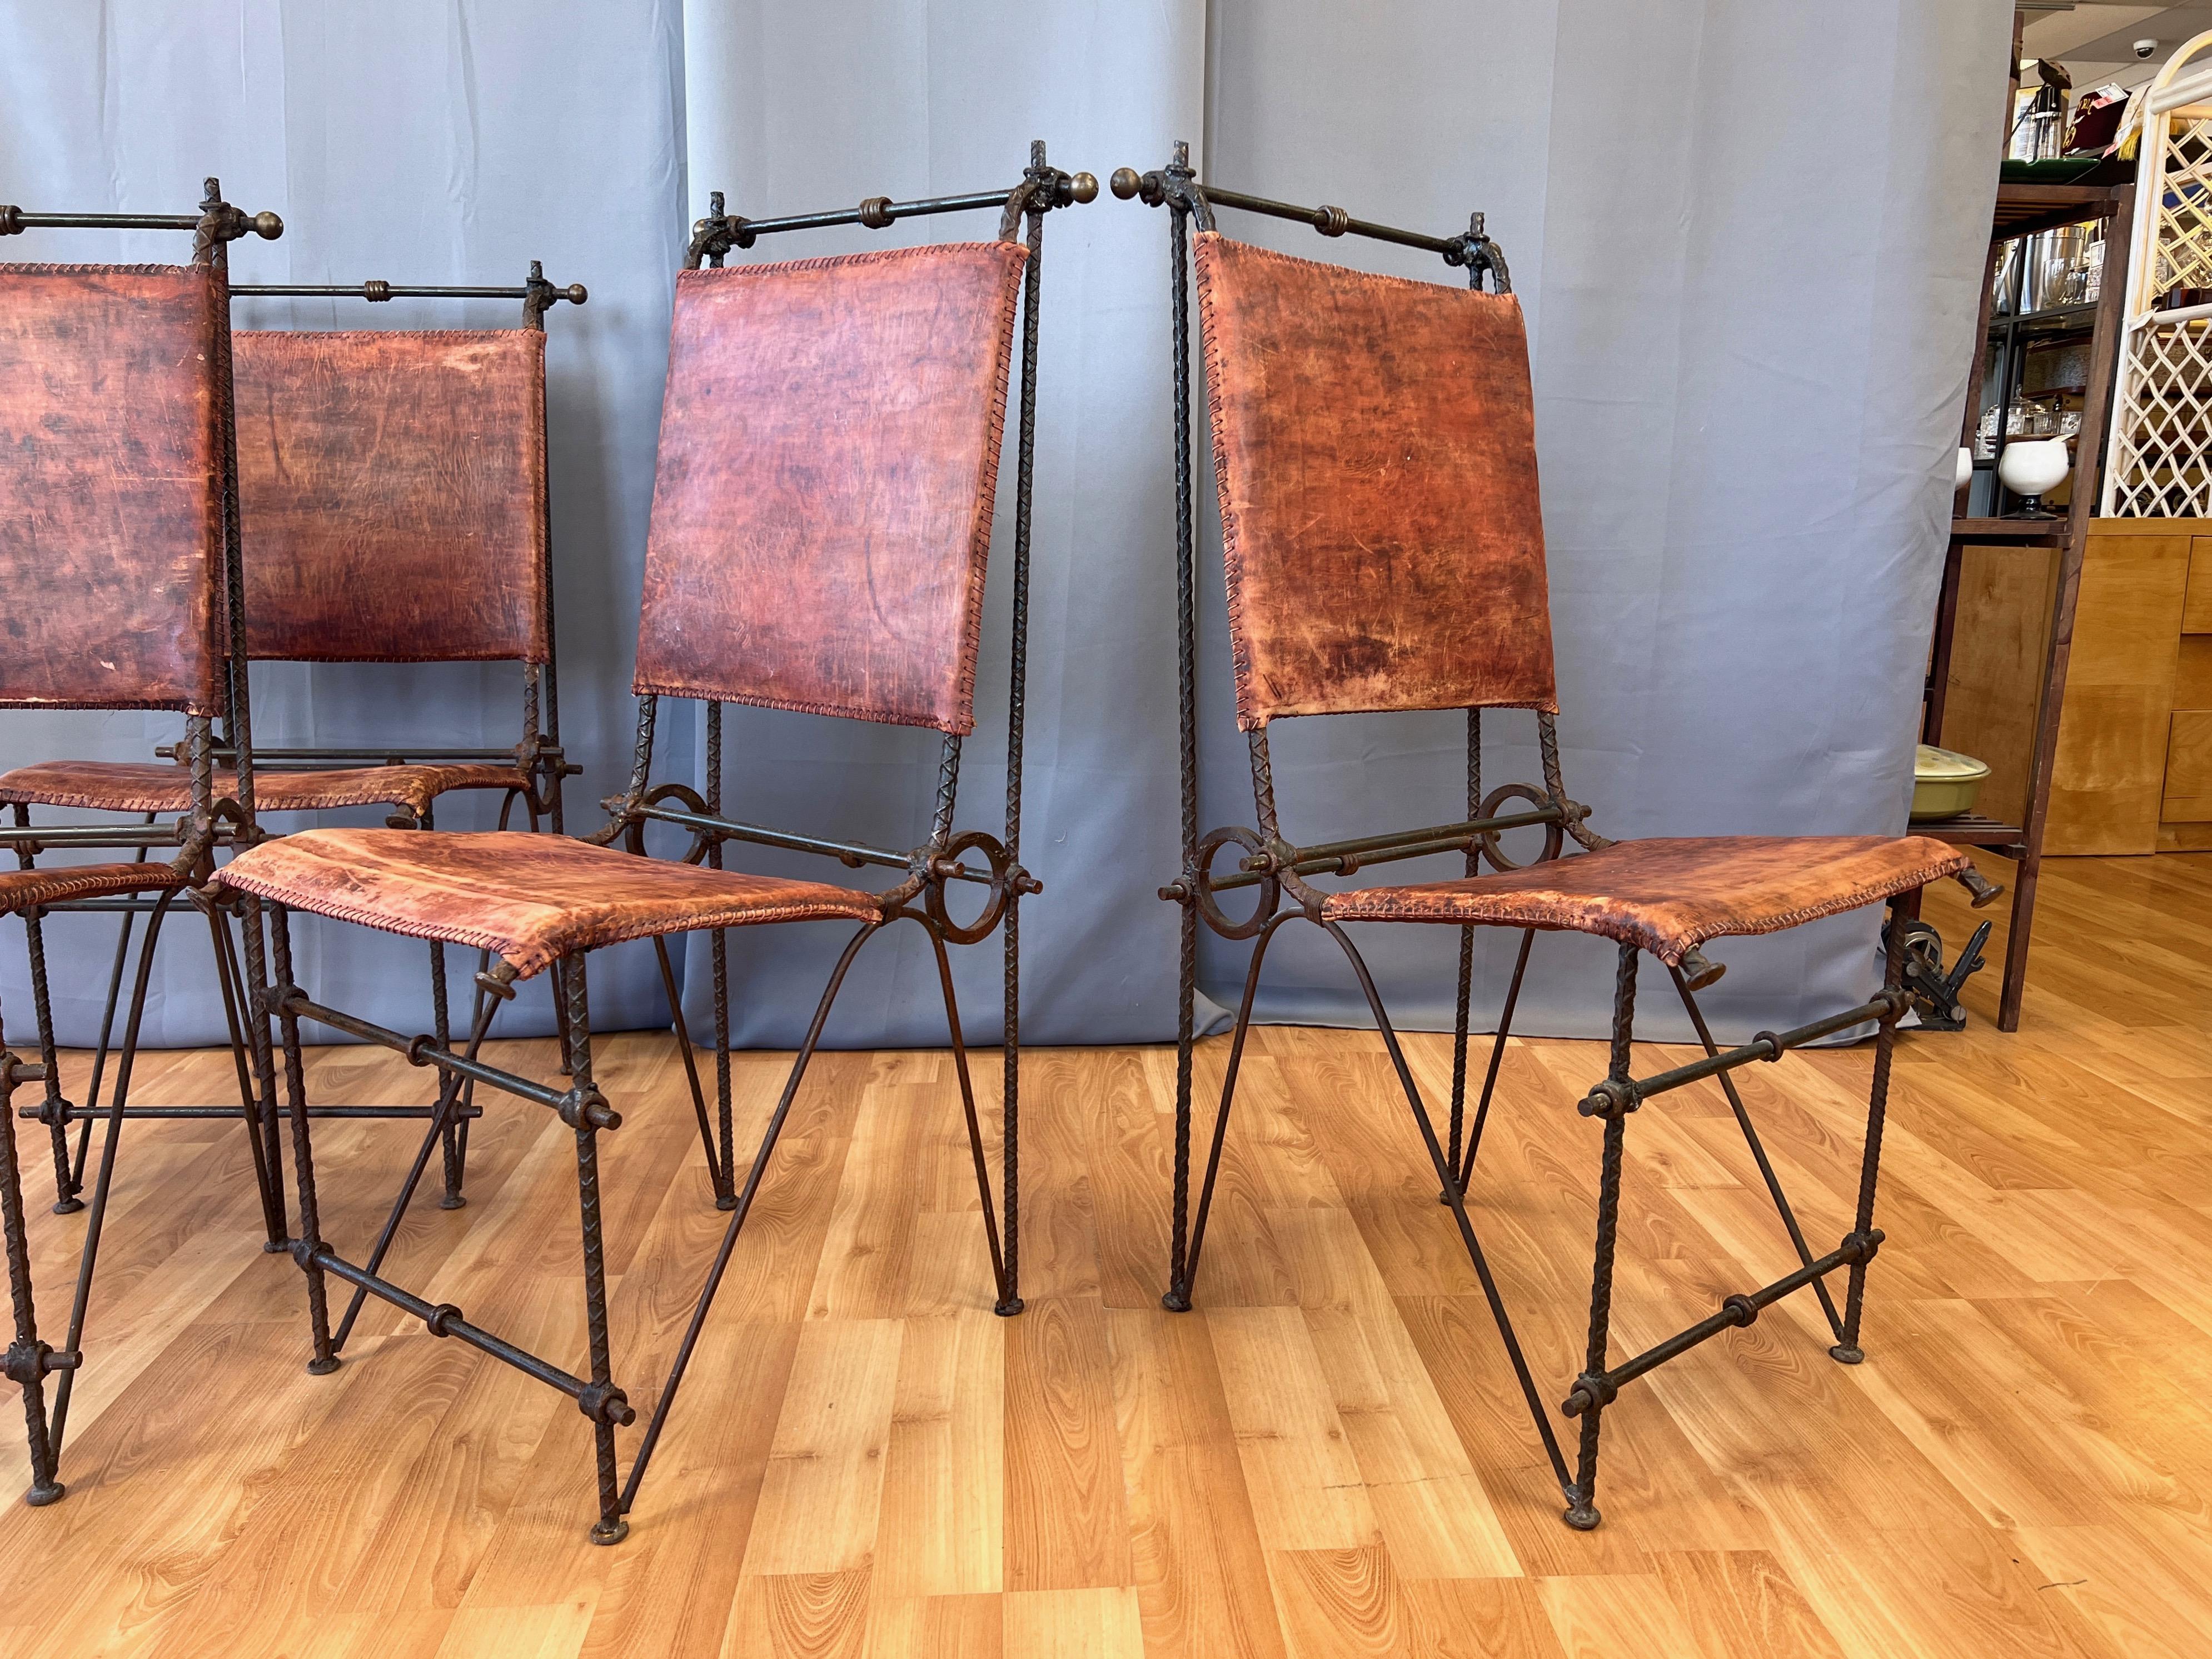 Set of 4 Ilana Goor-Attributed Brutalist Metal and Leather Dining Chairs, 1980 For Sale 2